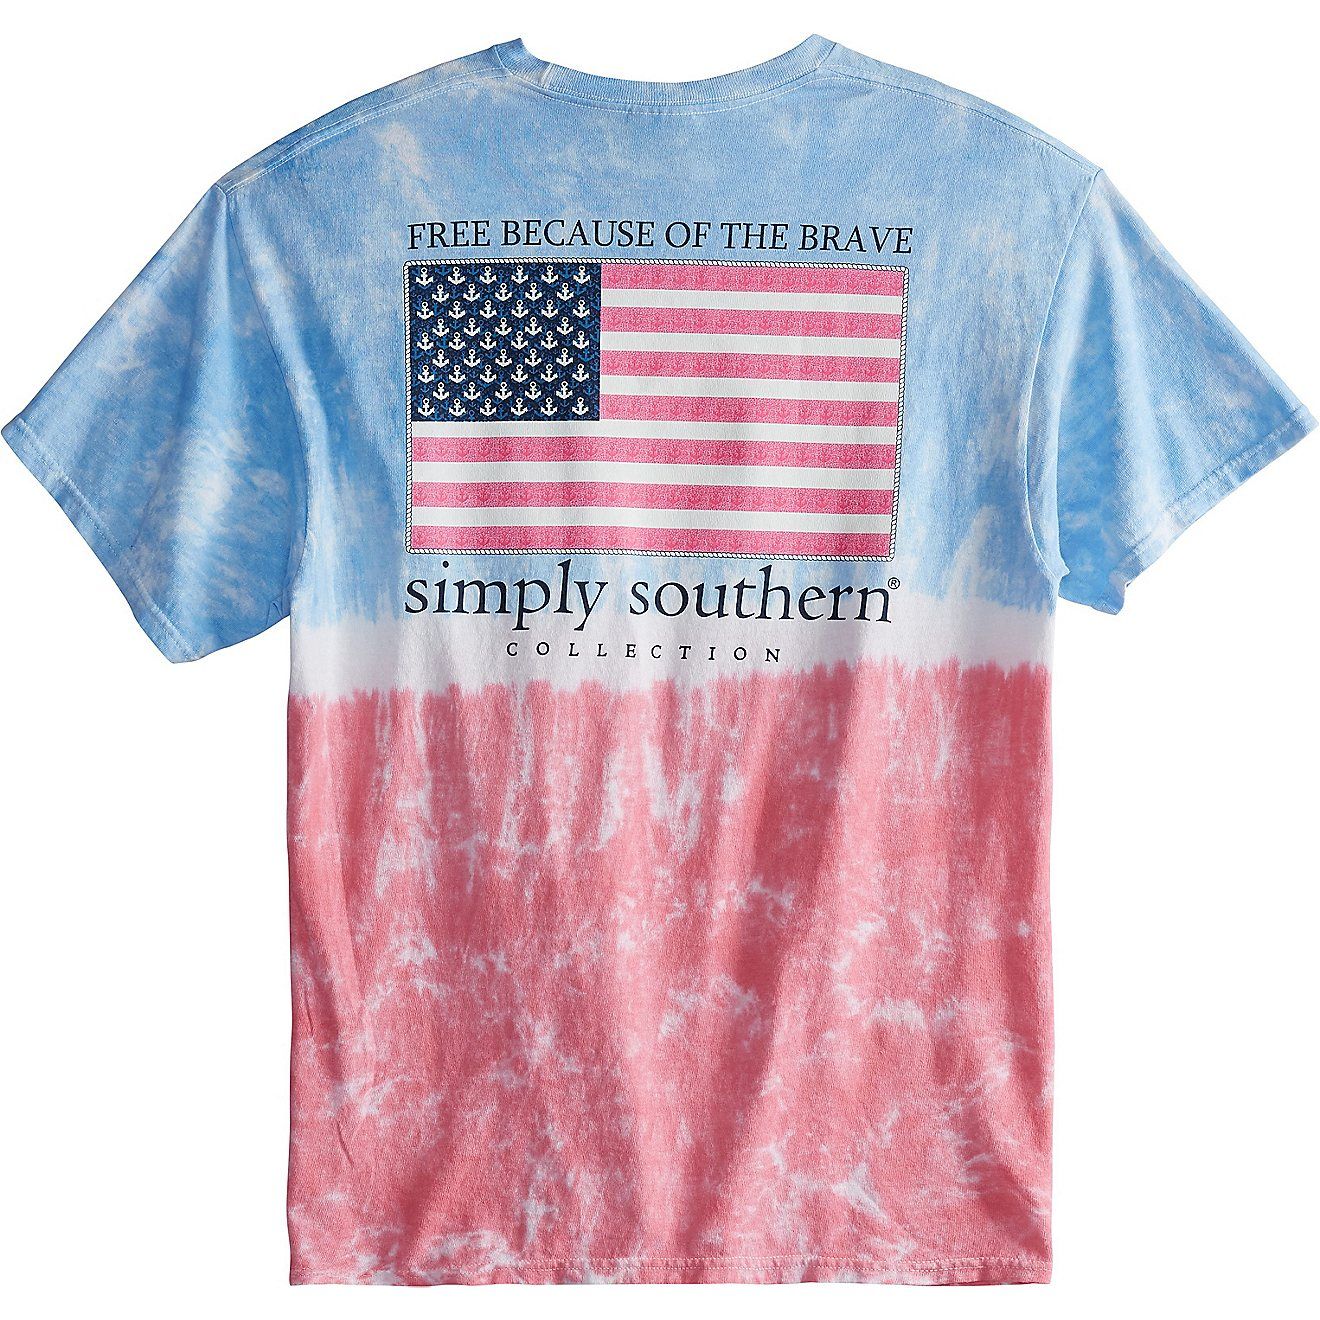 Simply Southern Women's Brave Graphic T-shirt | Academy Sports + Outdoor Affiliate